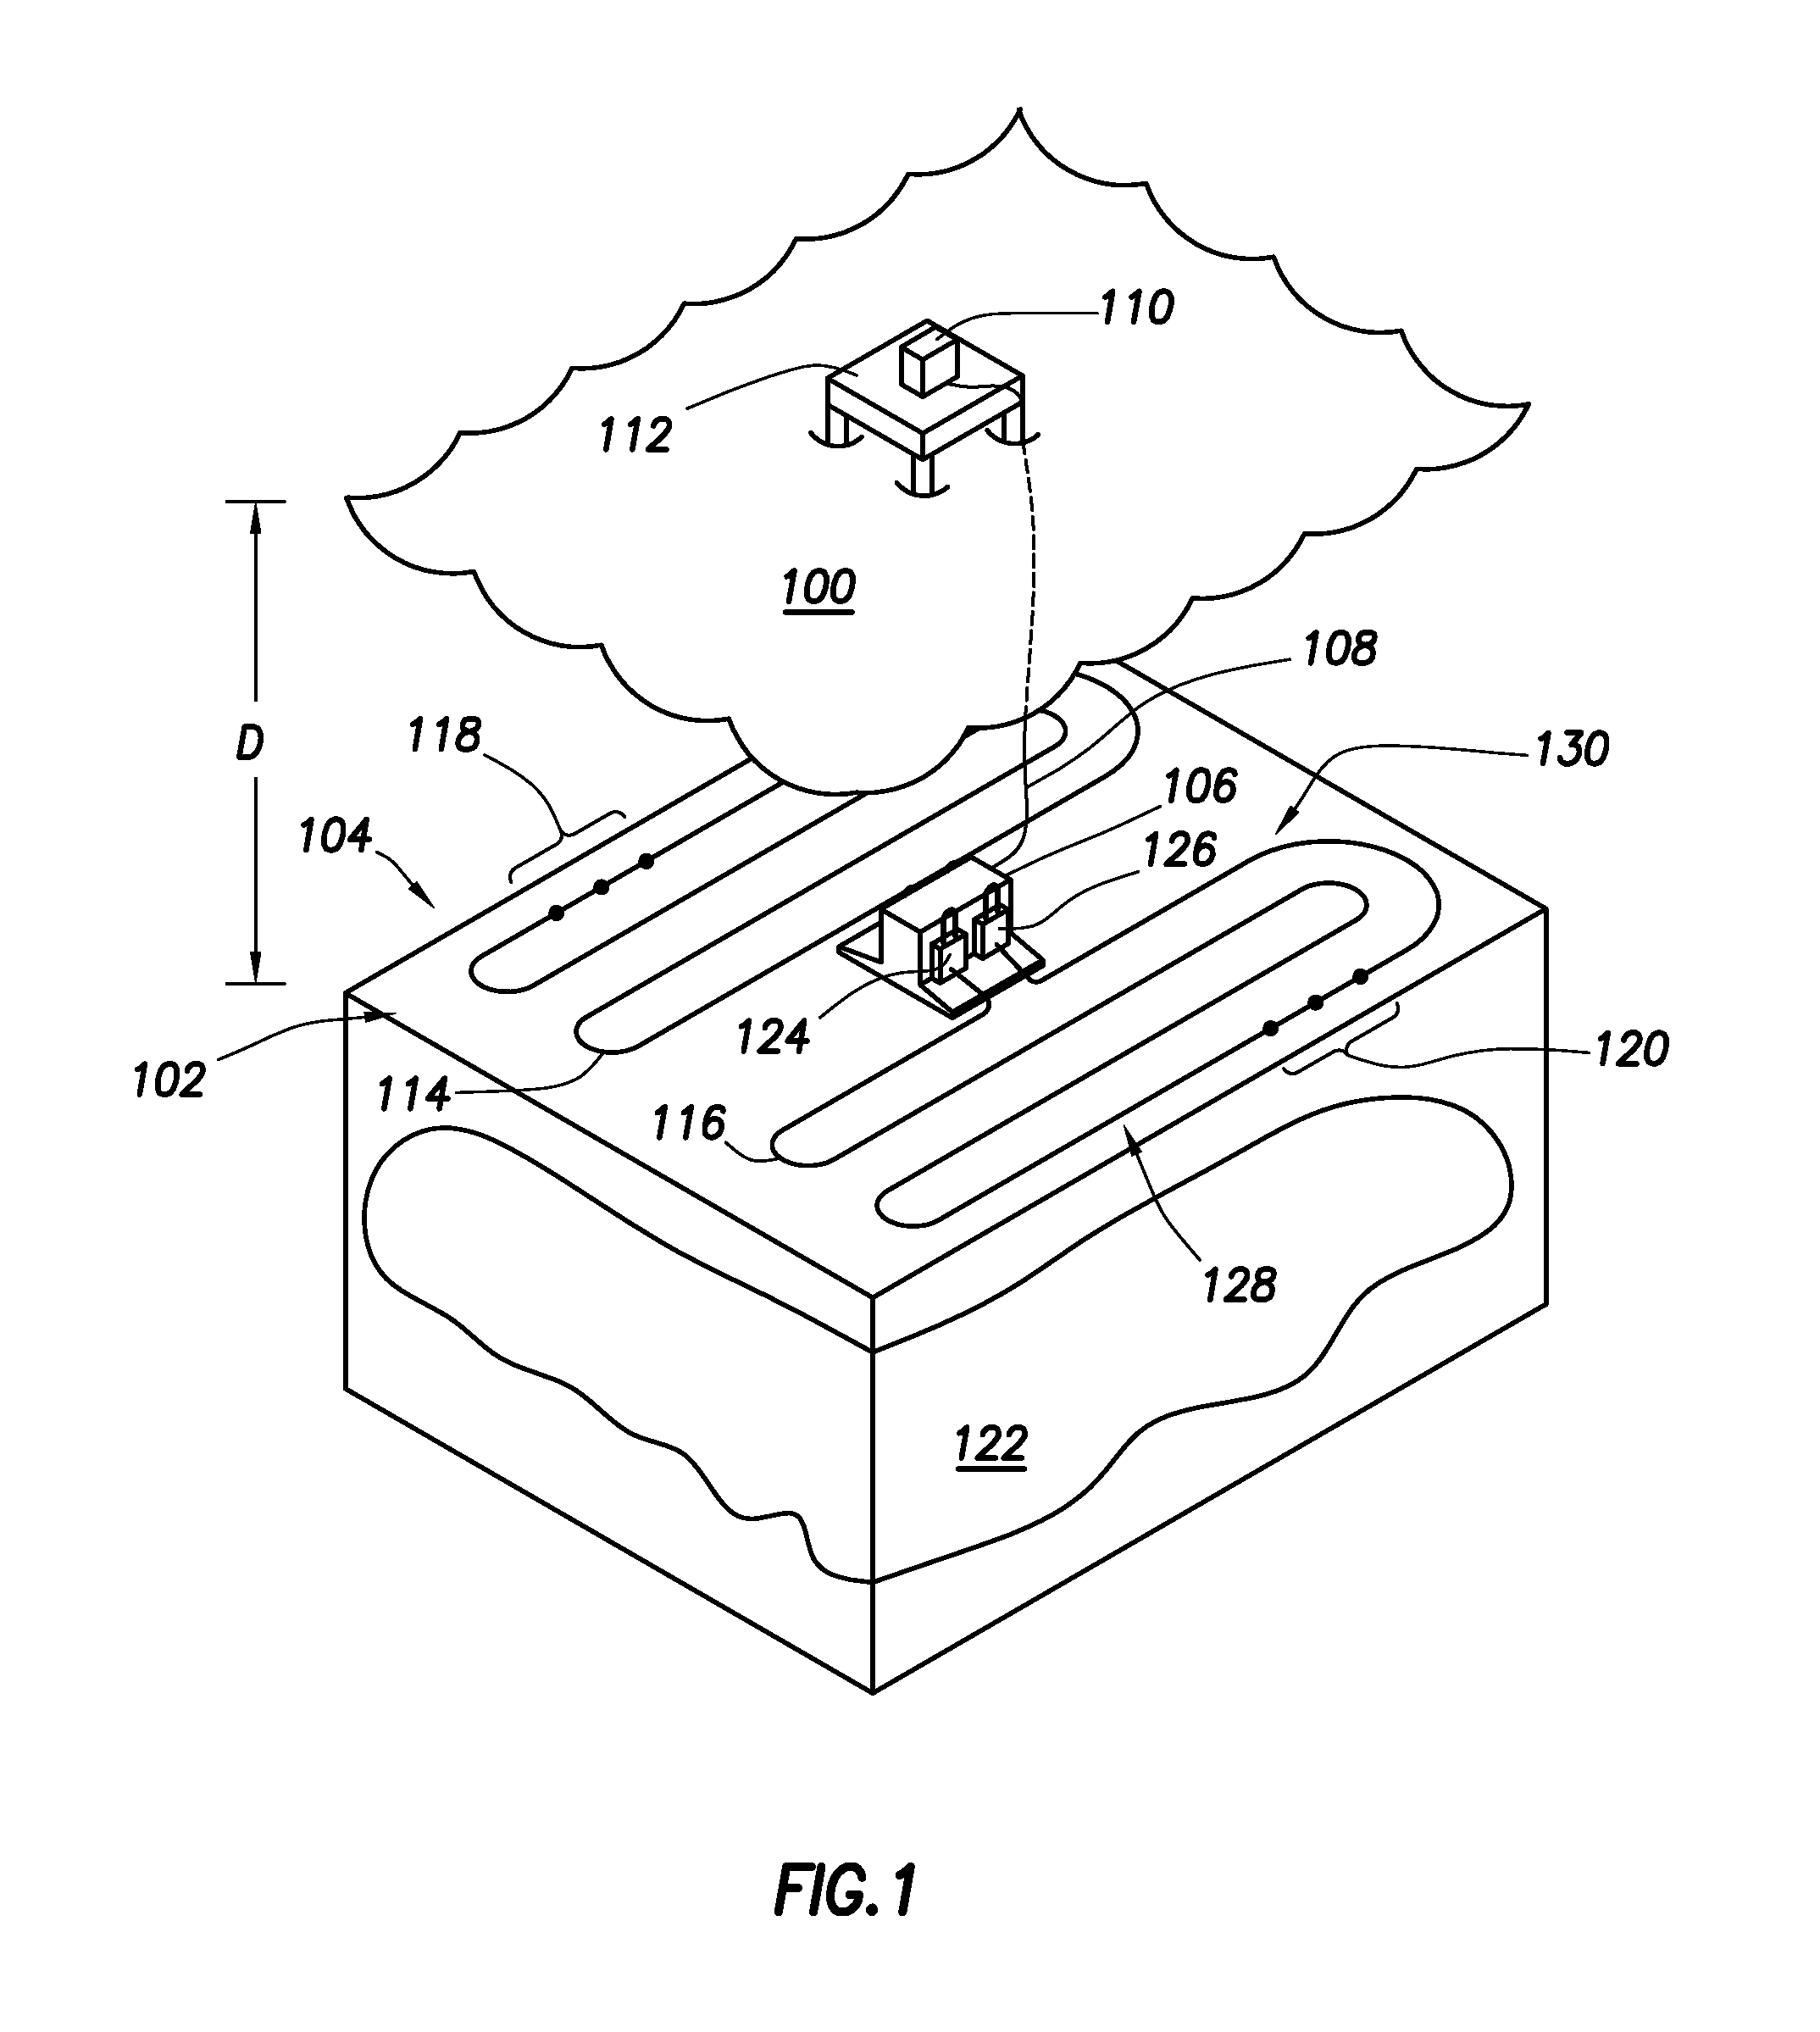 System and method of a reservoir monitoring system